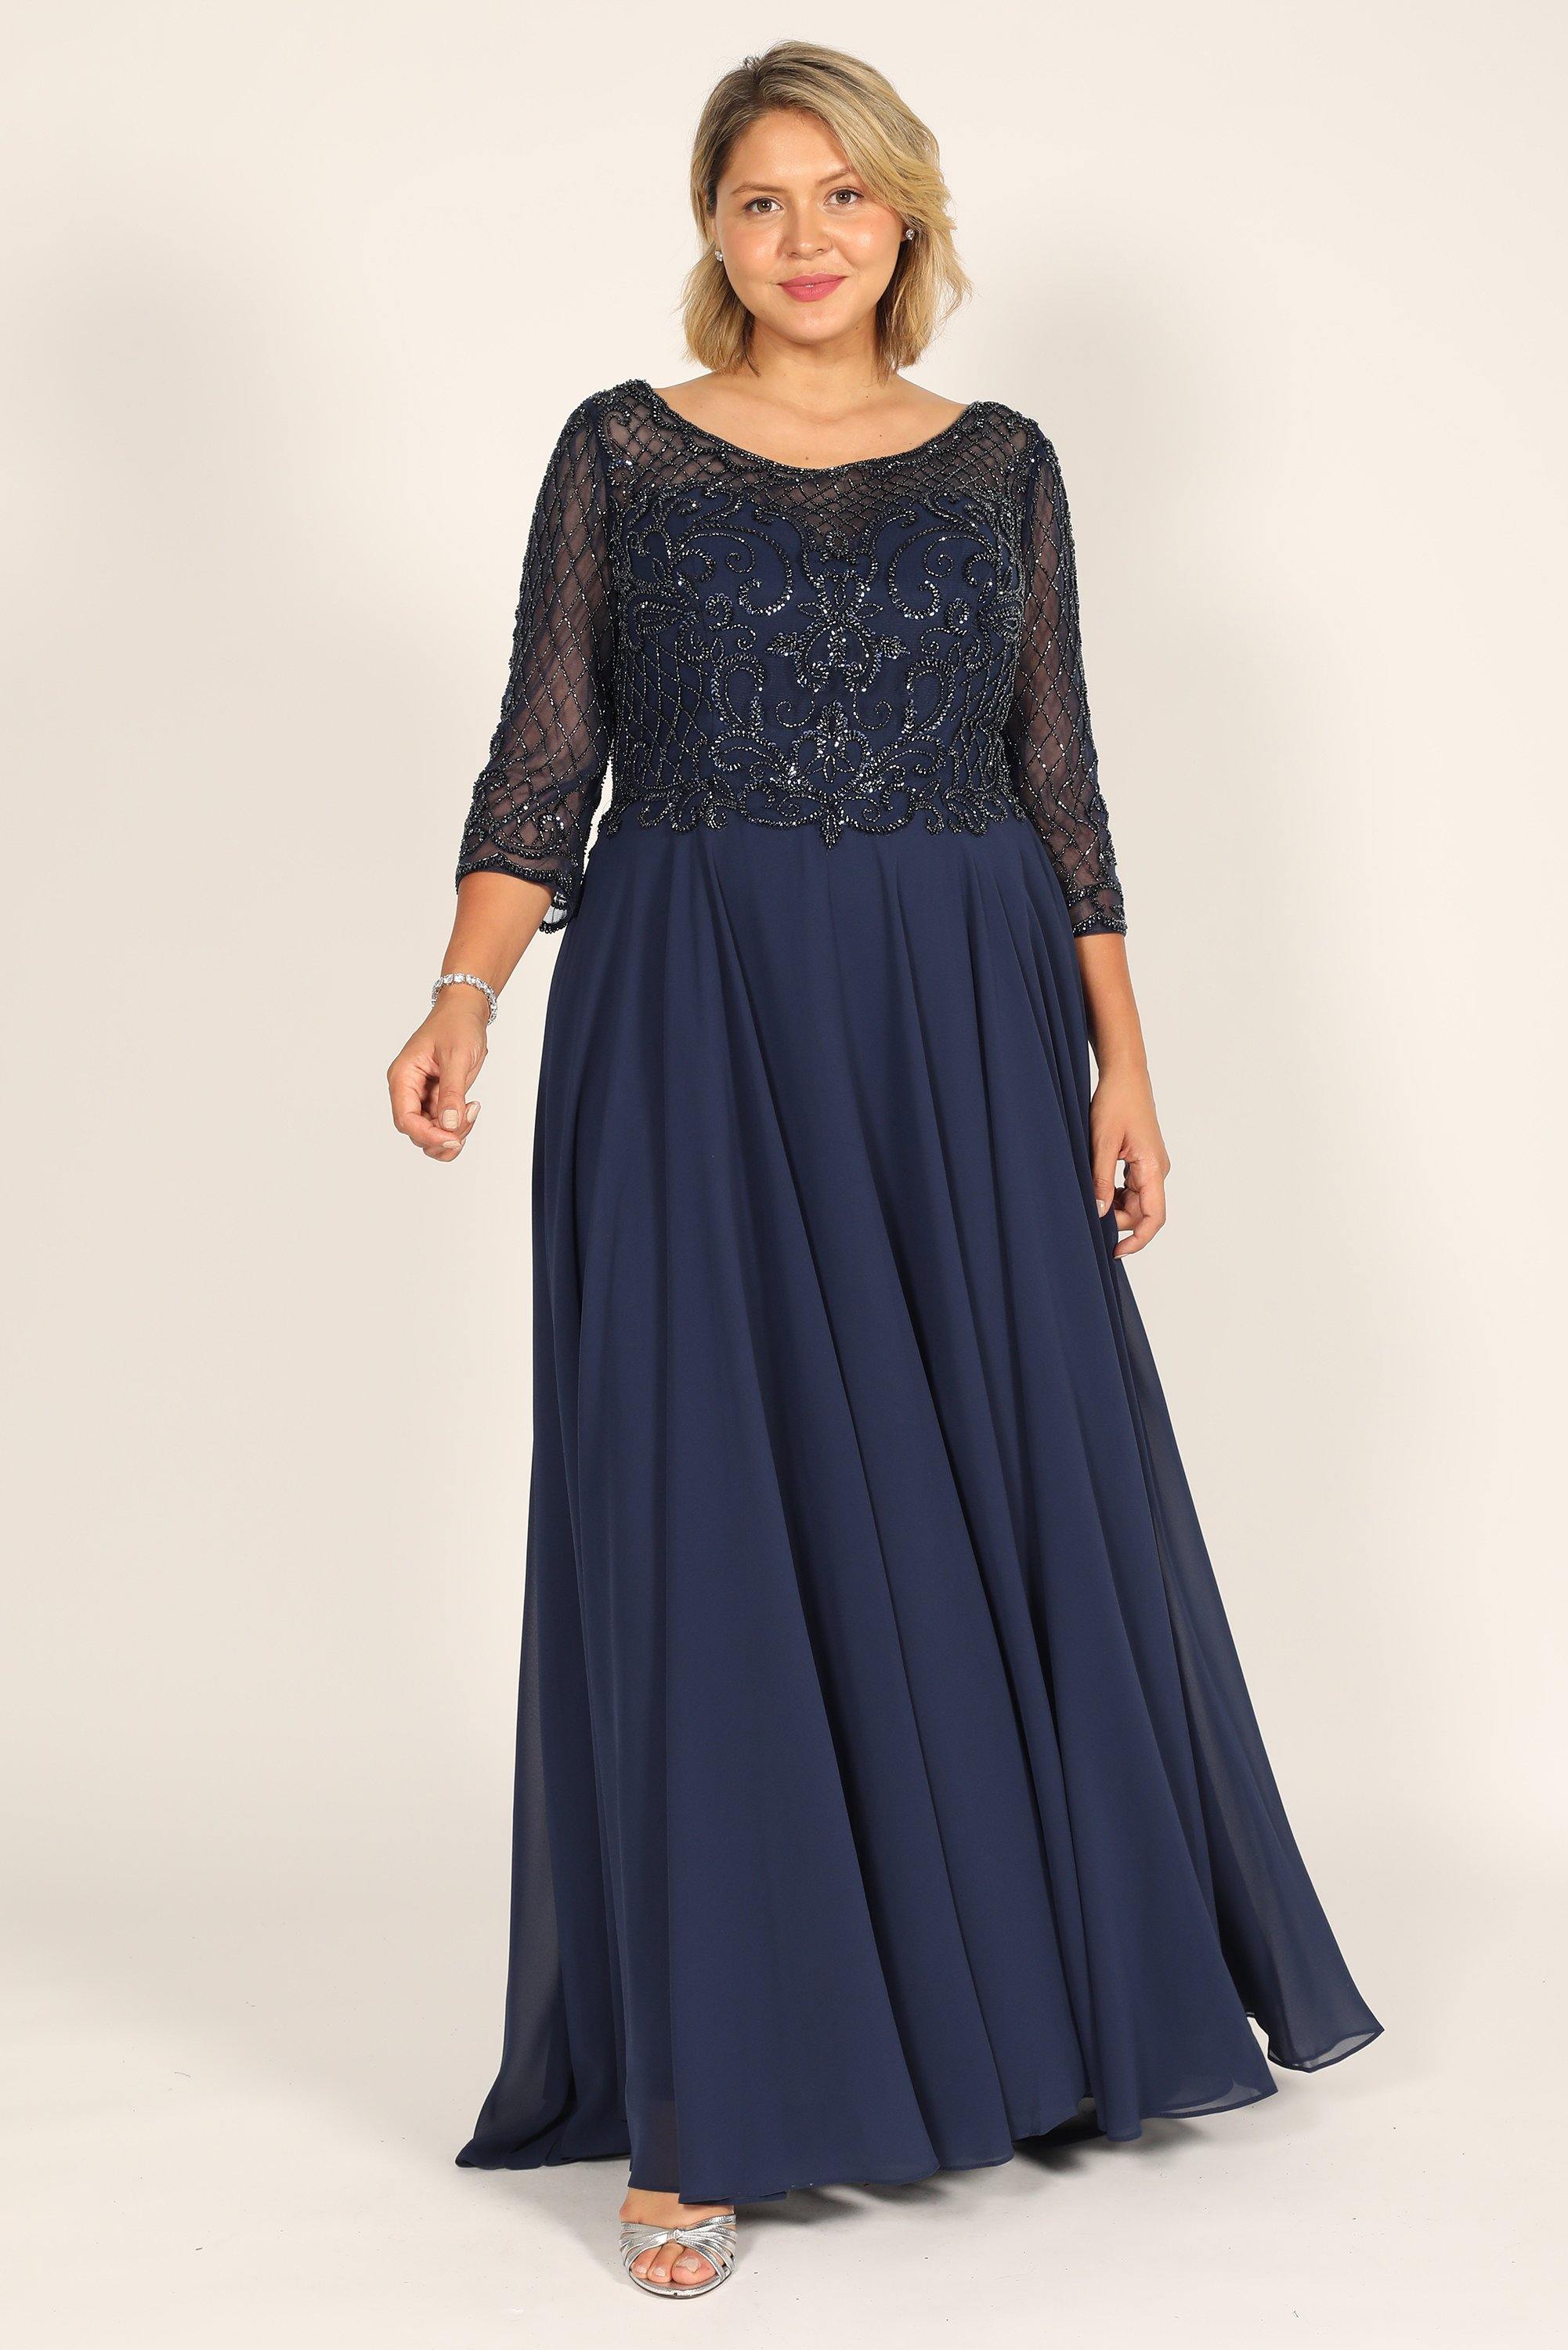 Long Sleeve Navy Mother of The Bride Dress - The Dress Outlet